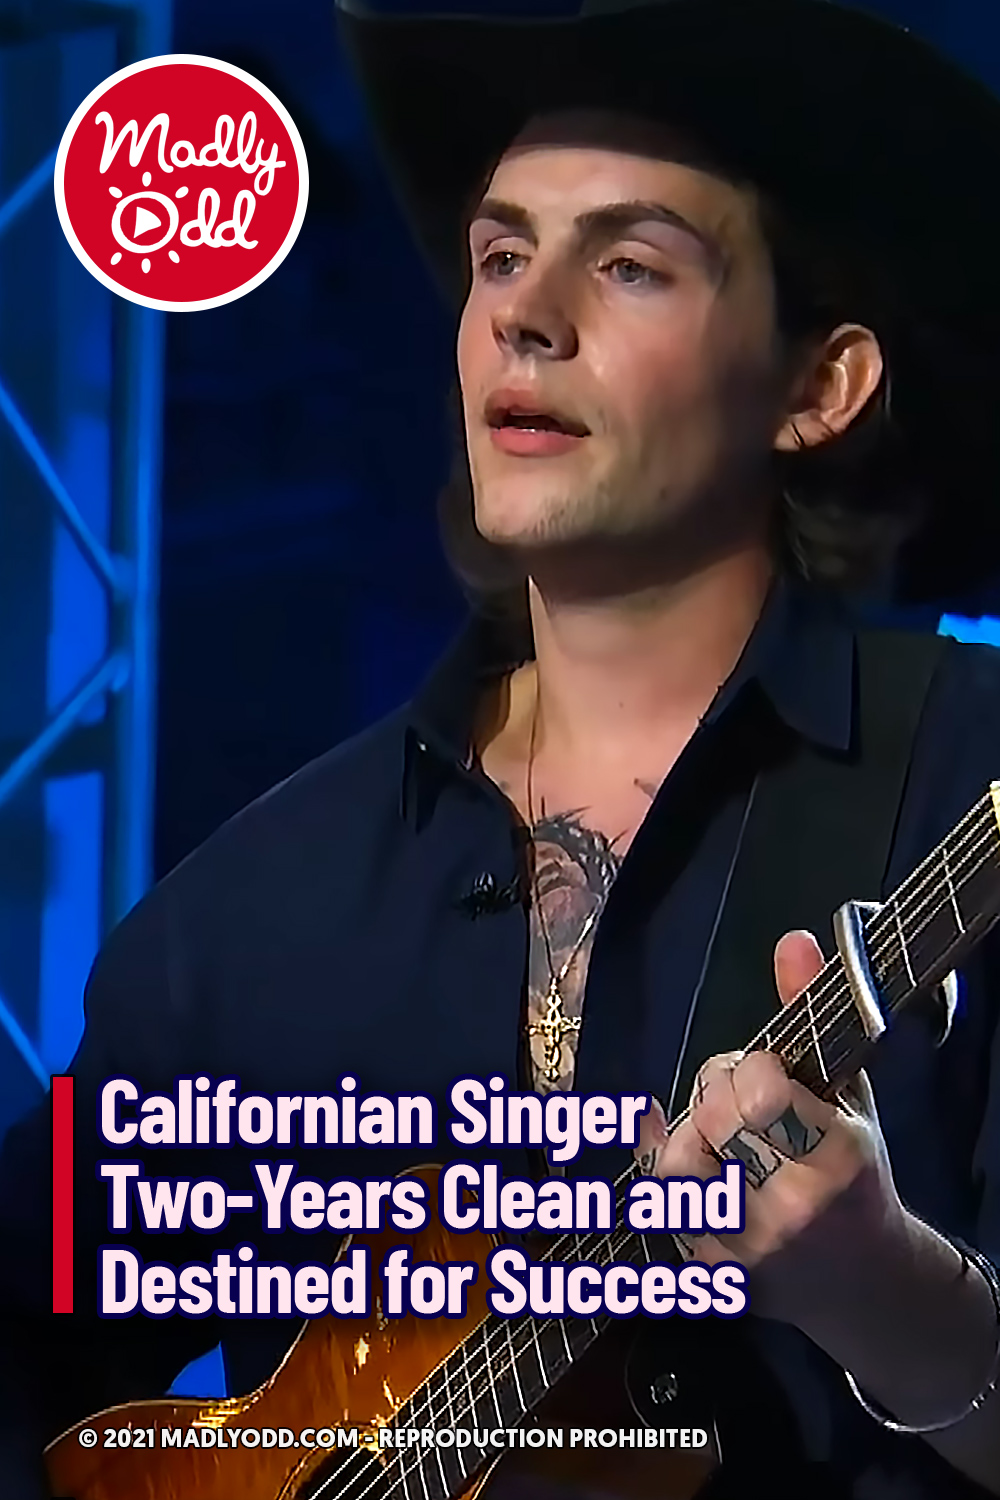 Californian Singer Two-Years Clean and Destined for Success